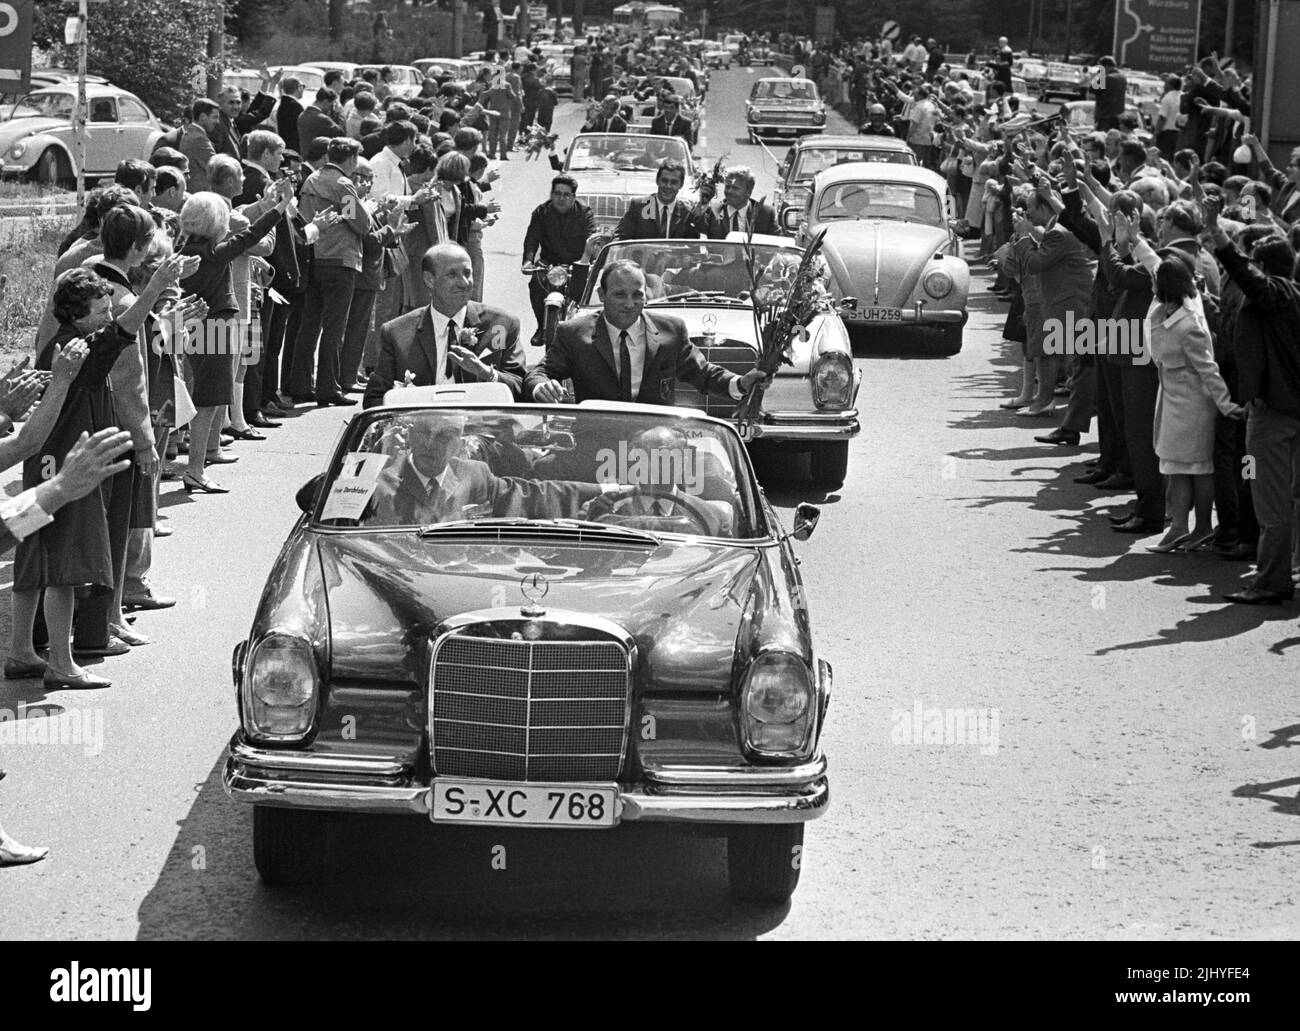 FILED - 31 July 1966, Hessen, Frankfurt am Main: The German national soccer team is received as vice world champions after the World Cup in England. the then national coach Helmut Schön (l) and striker Uwe Seeler sit in a motorcade in a Mercedes Benz. (b/w only) Seeler died Thursday (July 21, 2022) at the age of 85, his former club Hamburger SV confirmed, citing Seeler's family. Photo: dpa/dpa Stock Photo